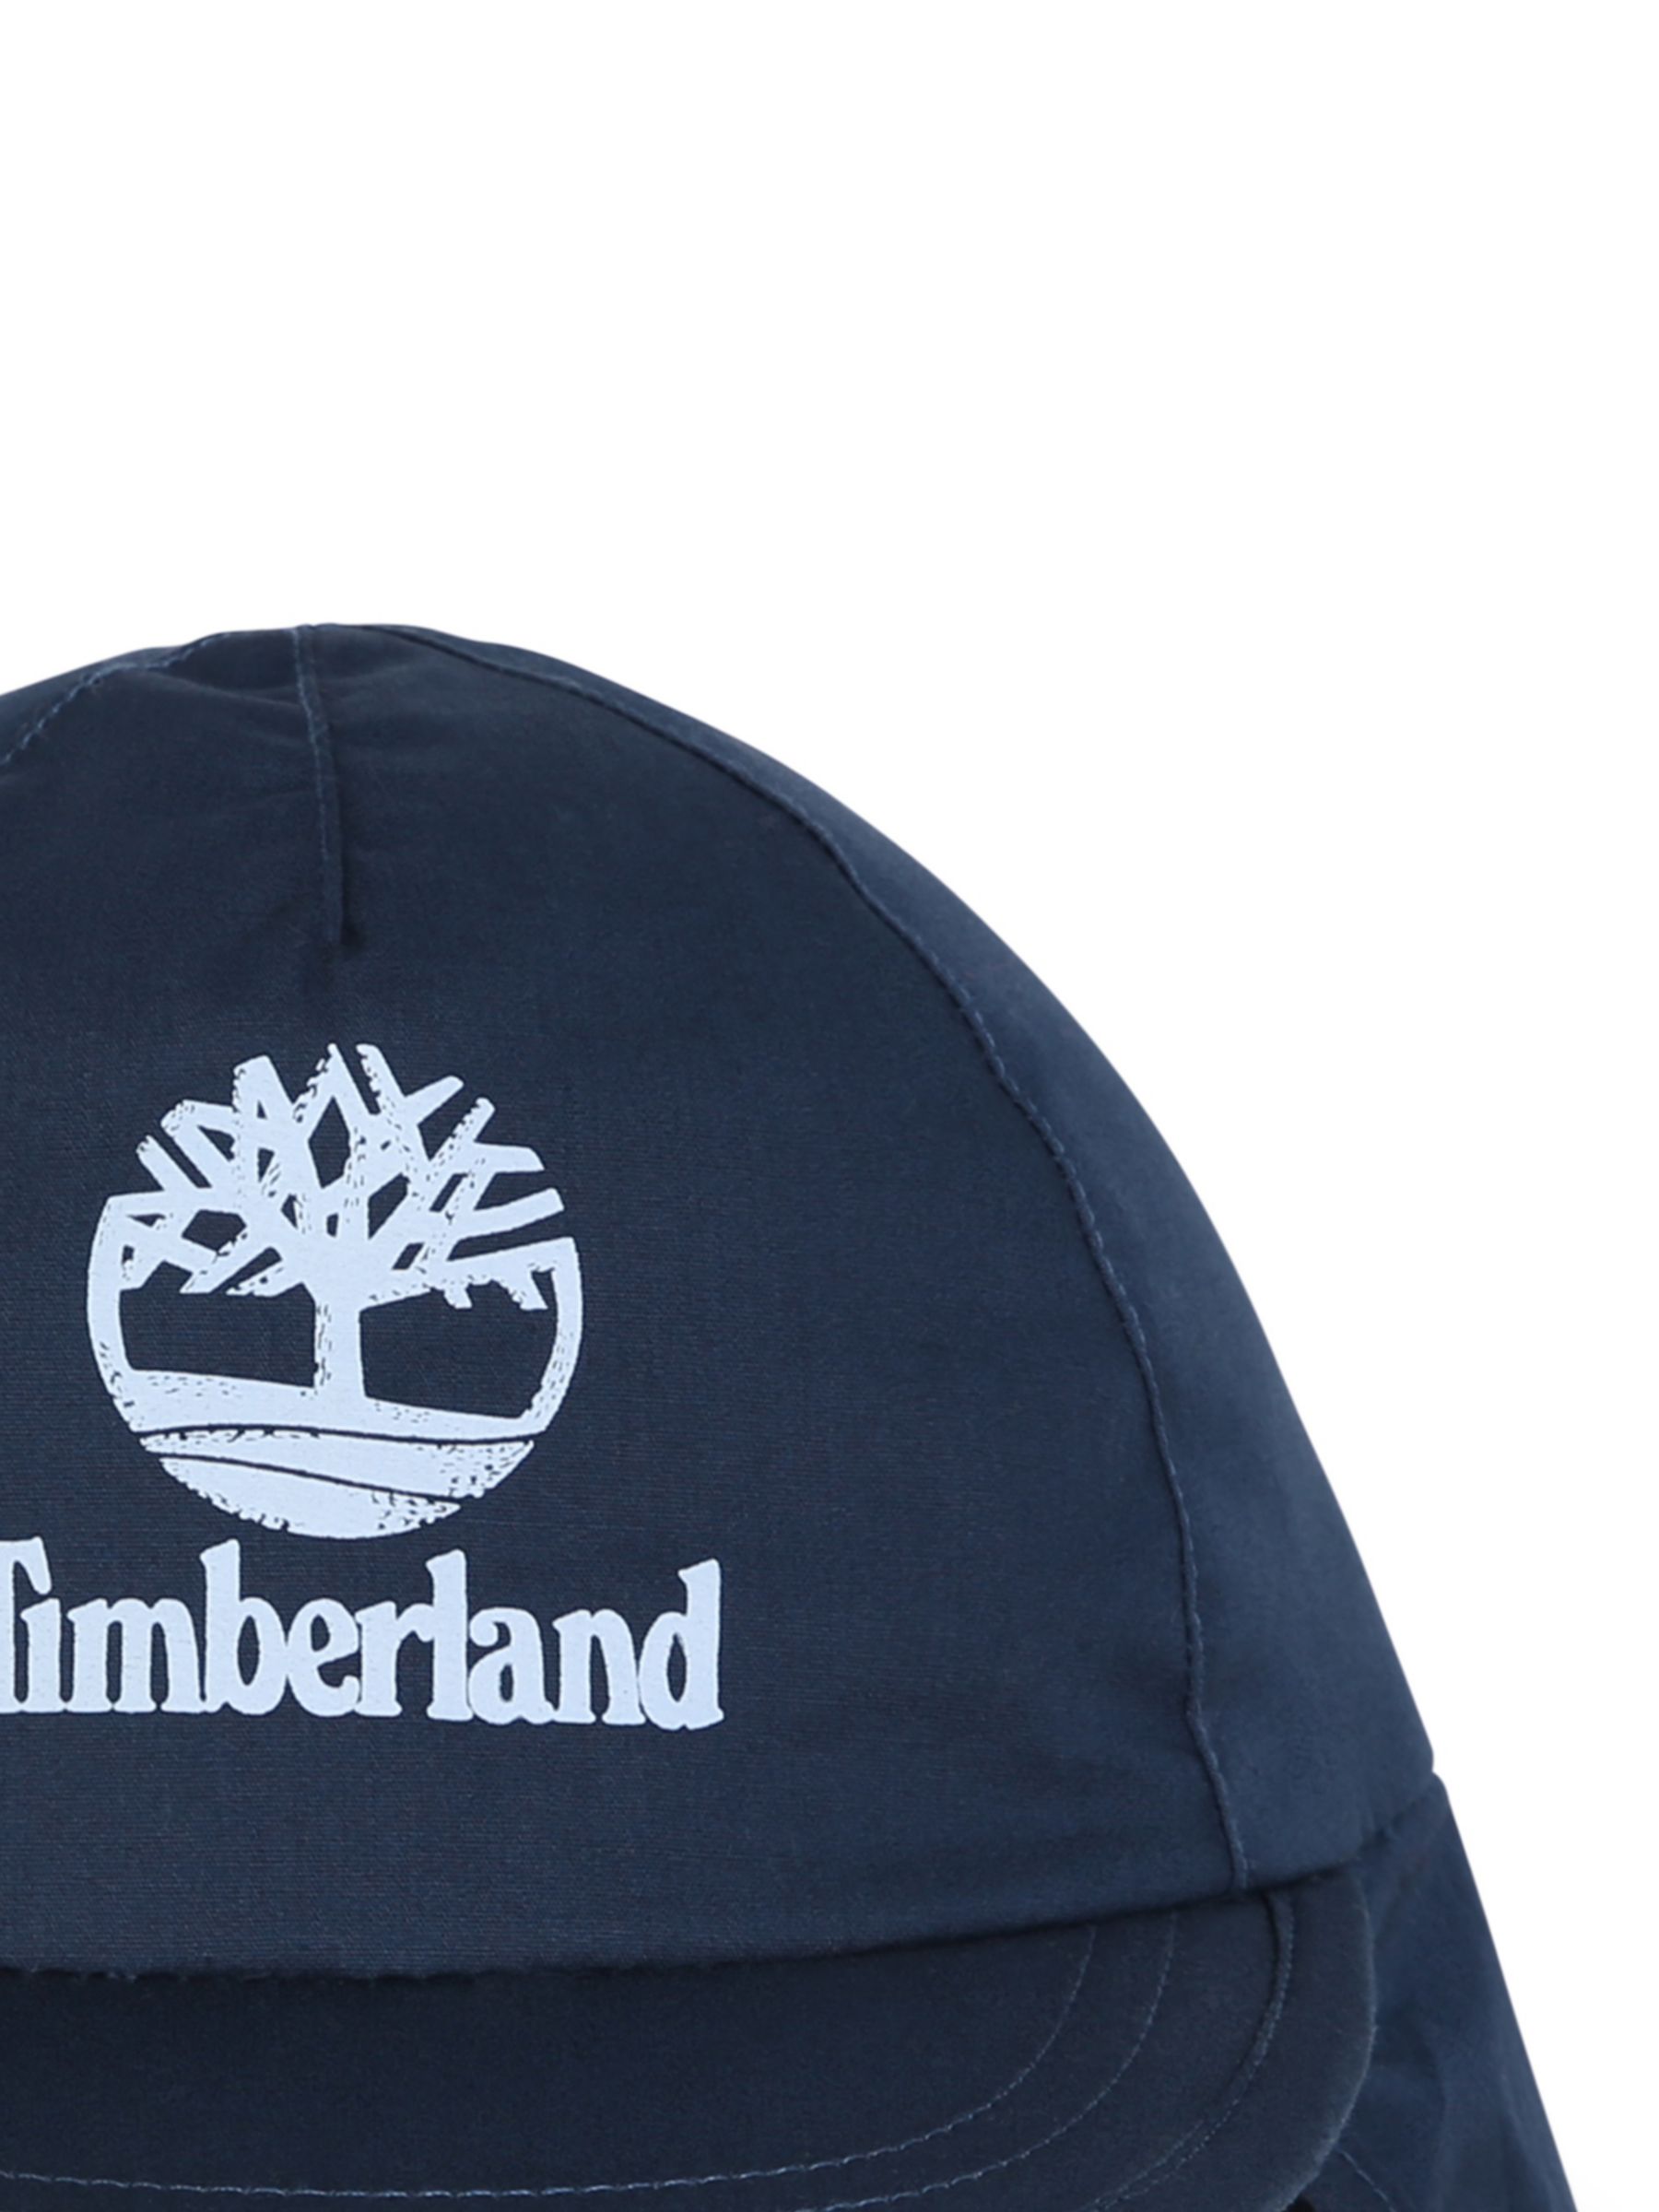 Timberland Baby Logo Neck Protection Cap, Navy/Multi, 3-6 months